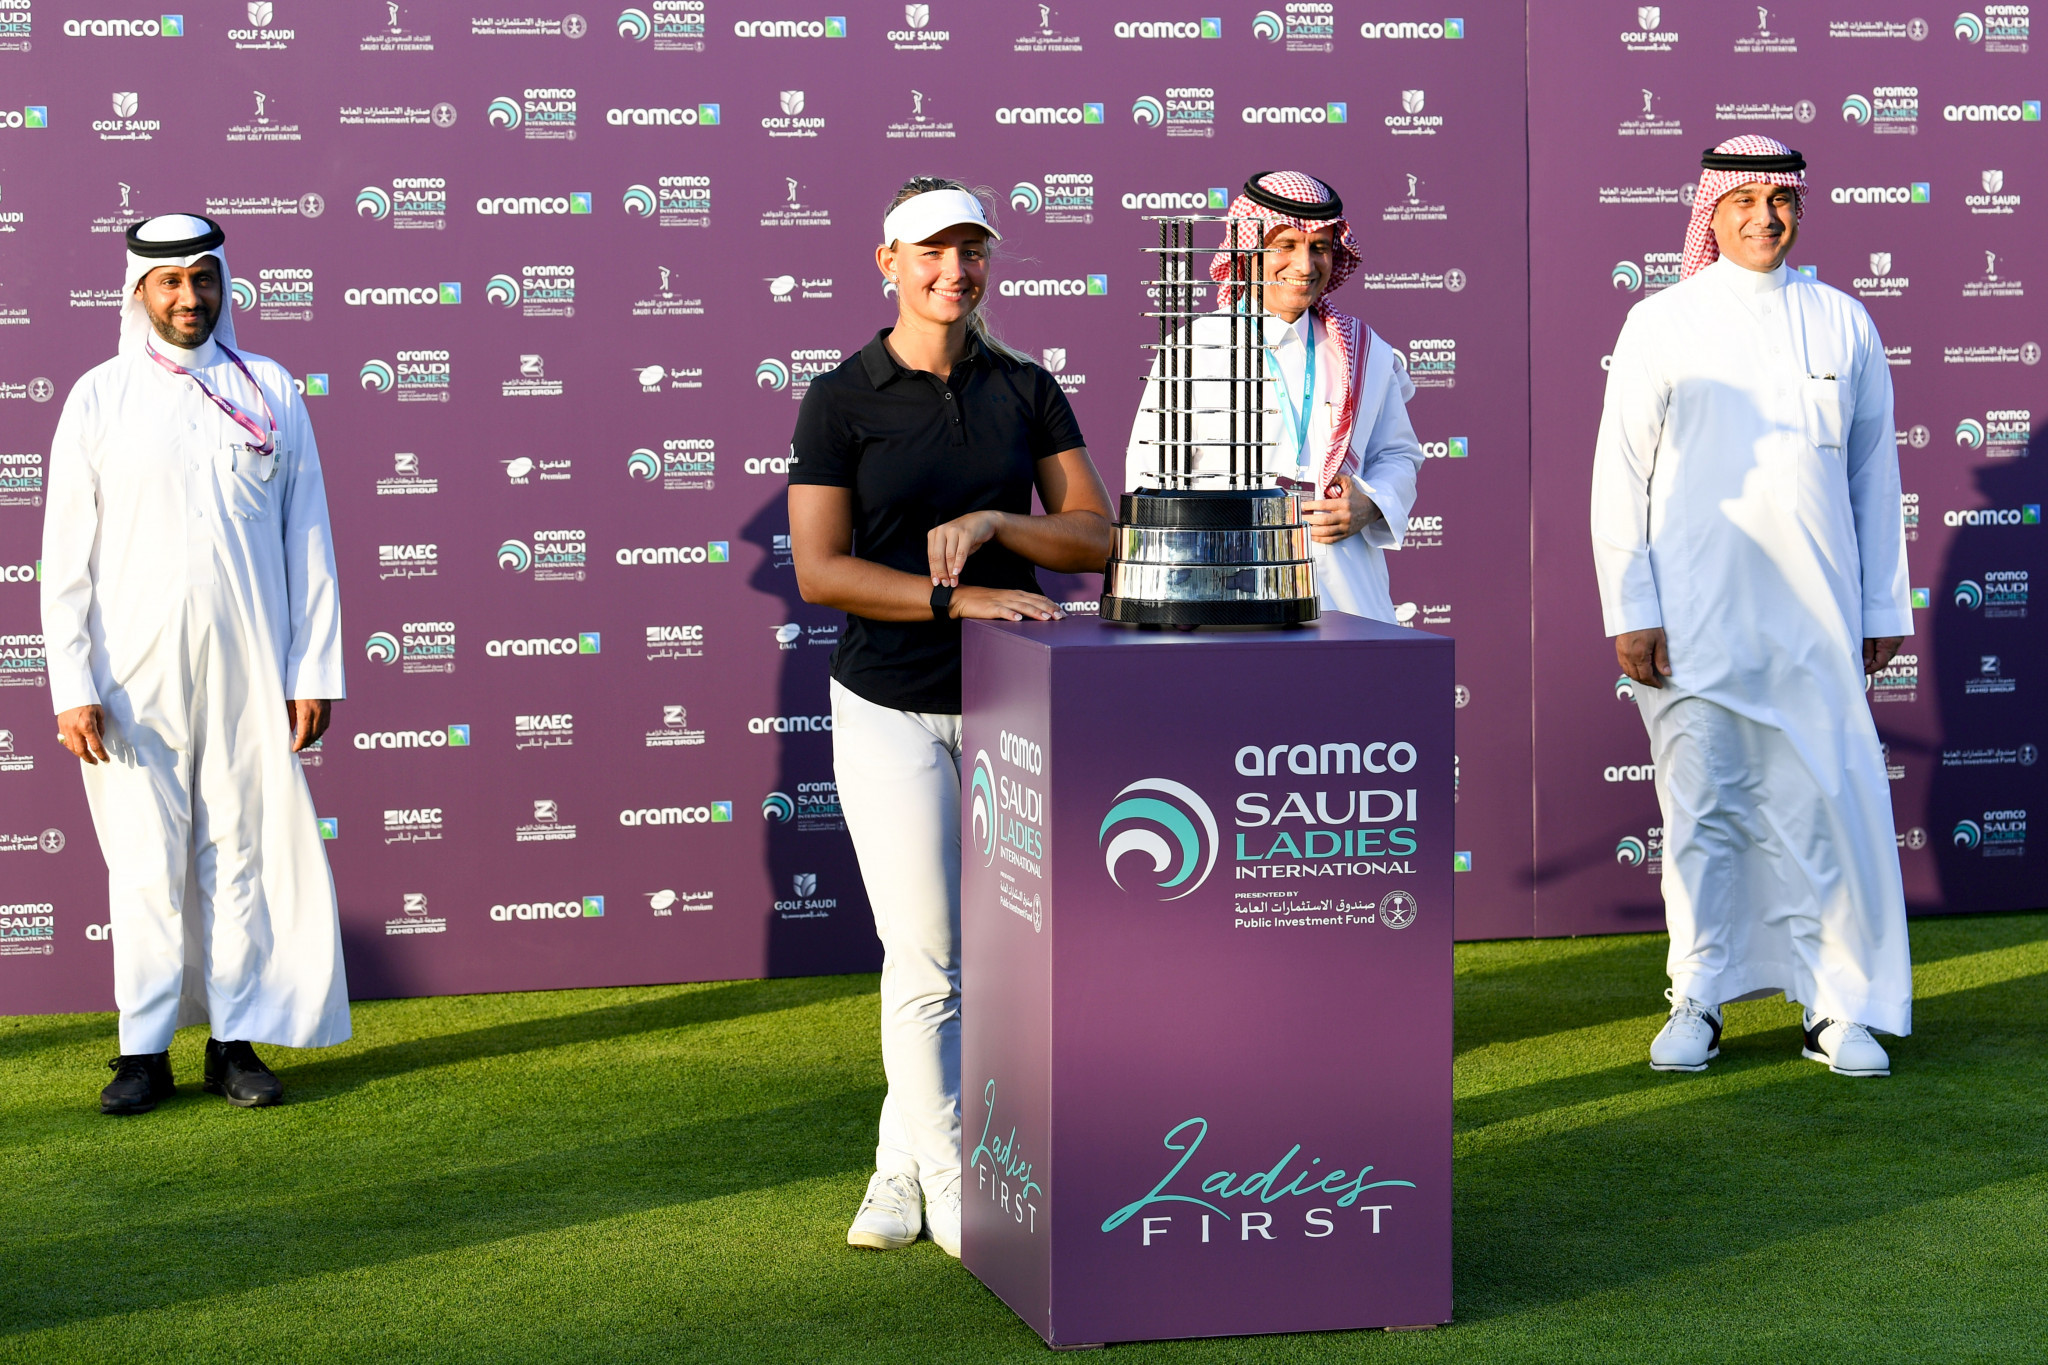 Emily Kristine Pedersen won the 2020 edition of the Saudi Ladies International, one of the tournaments helping to grow golf in Saudi Arabia ©Getty Images